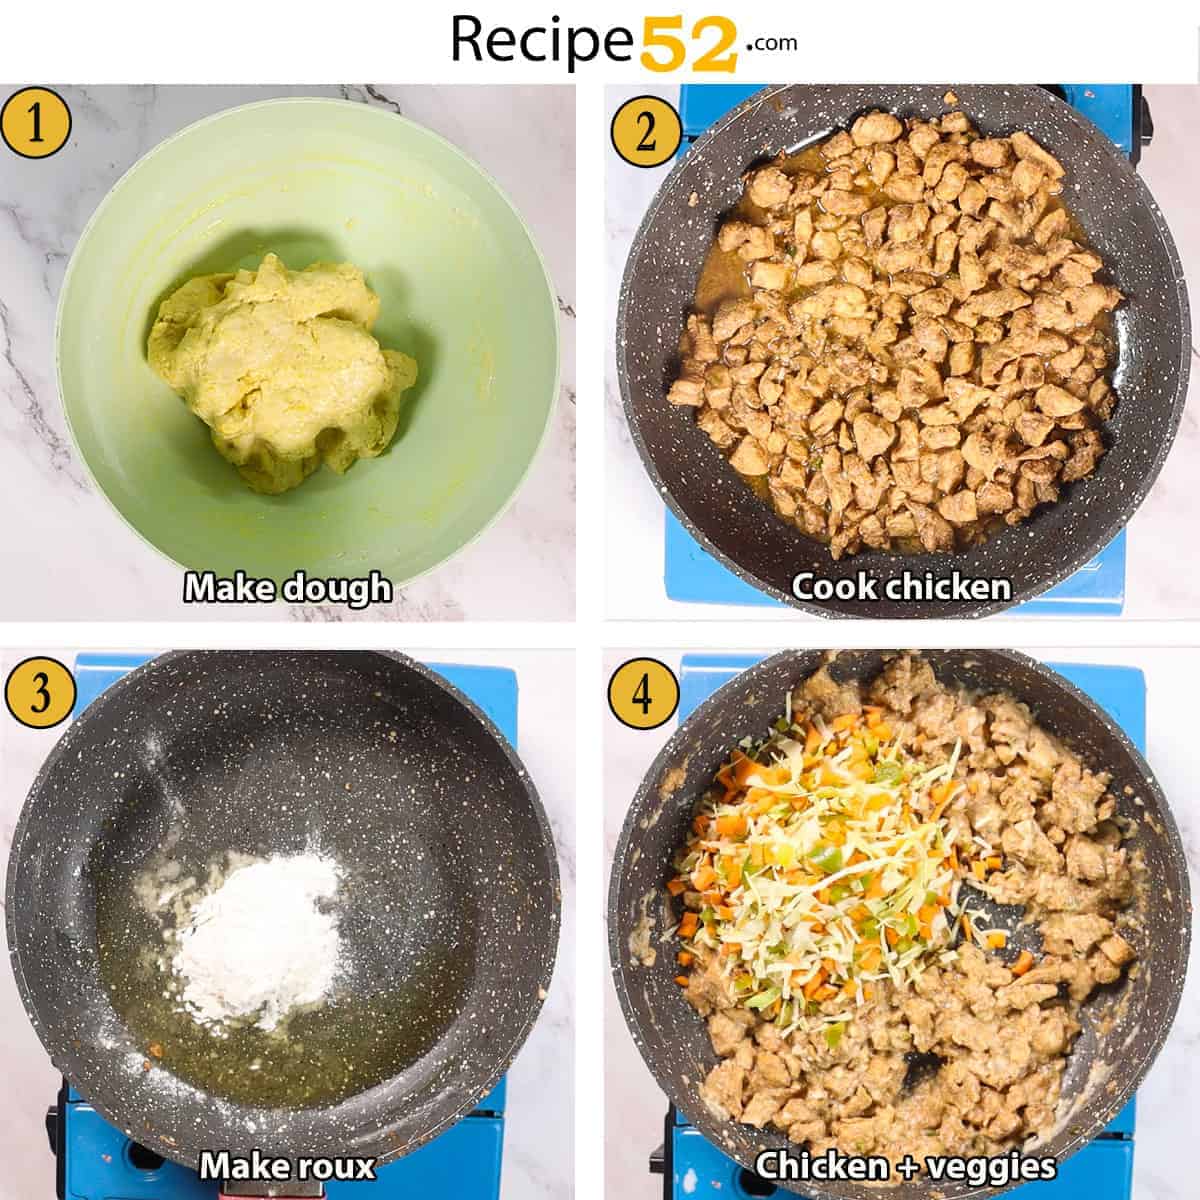 Steps to make chicken filling and dough.